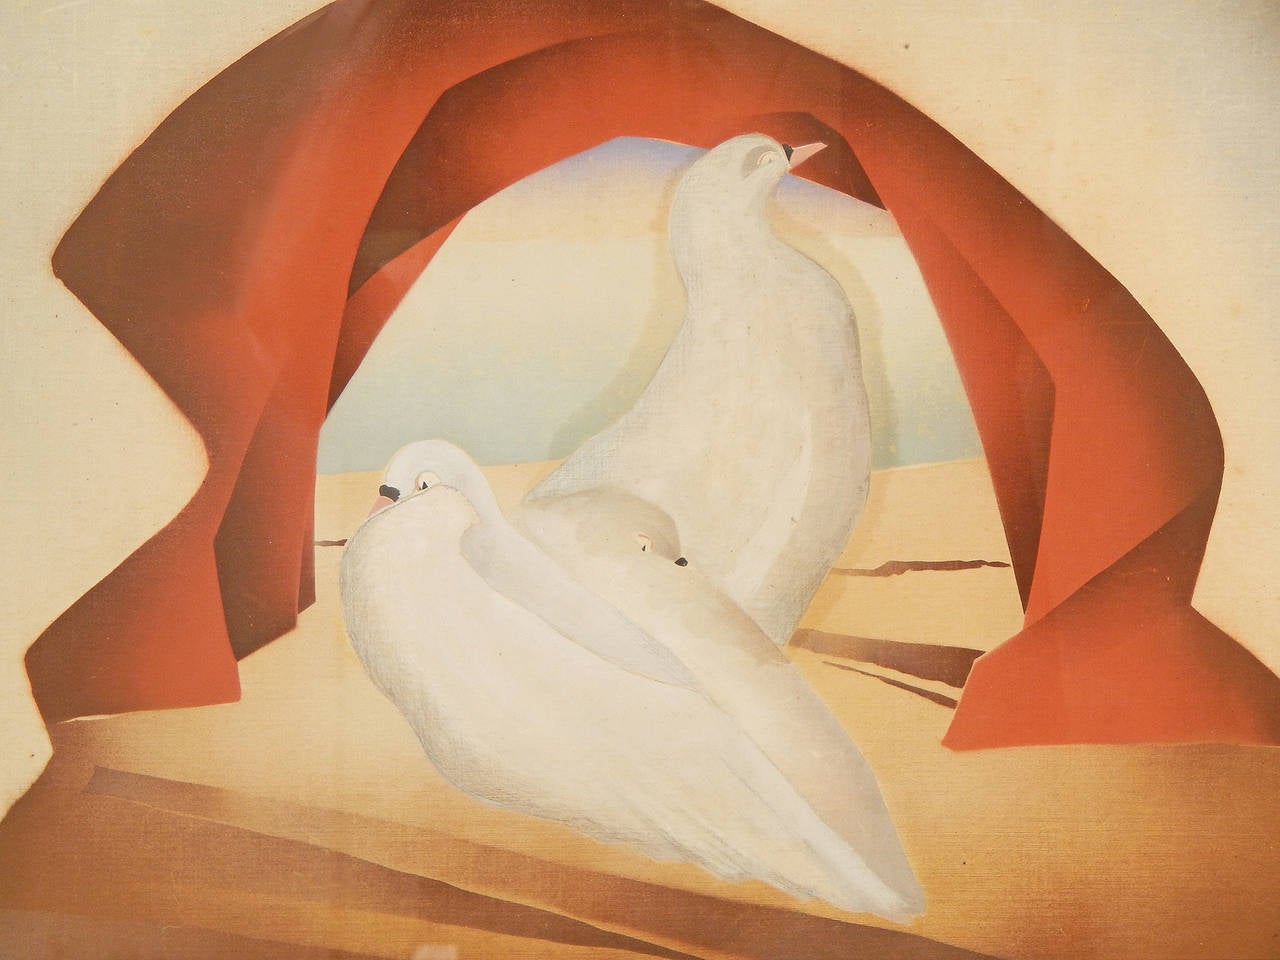 A wonderful example of Art Deco painting by William Hentschel, this piece also reflects the influence of Surrealism in the stylized arch that seems to be made of fabric, and the platform for the doves, which seems like a rock outcropping in the